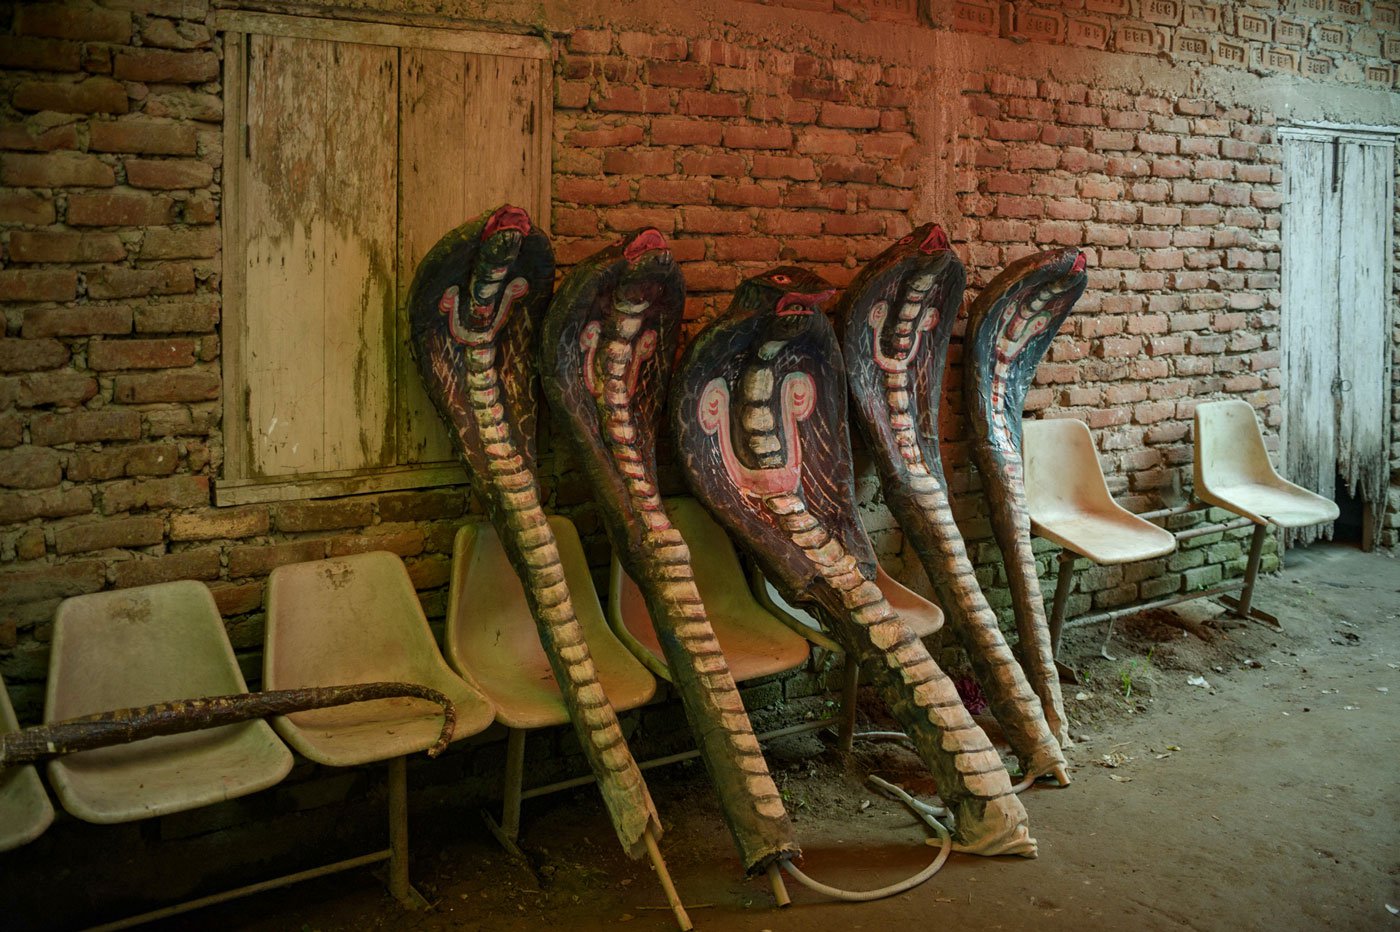 The five hoods of the mythical snake Kaliyo Naag rest against the wall at the Garamur Saru Satra. Handmade props such as these are a big part of the festival performances.